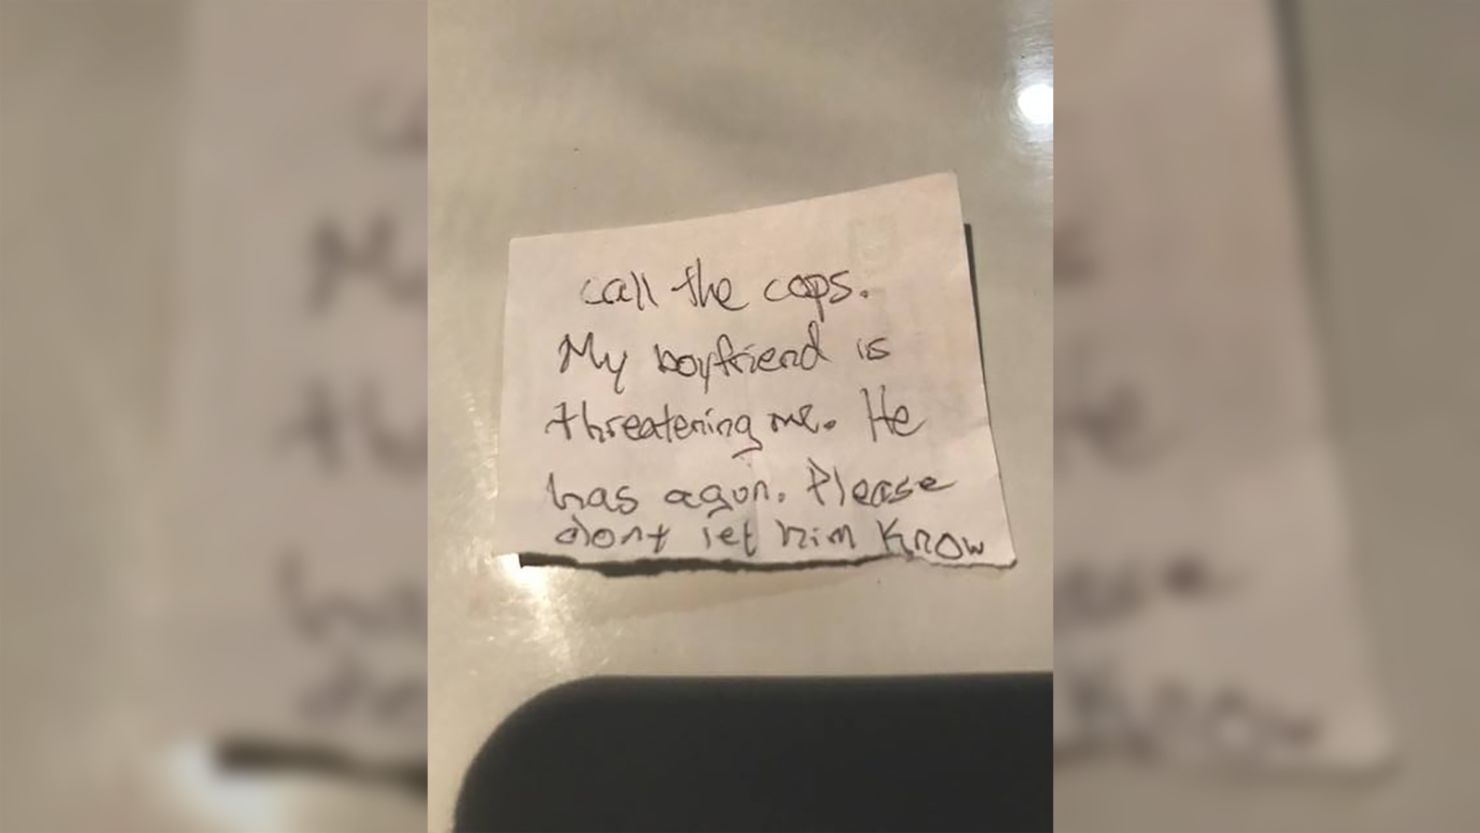 A woman in Florida is safe after slipping this note to staff at an animal hospital.